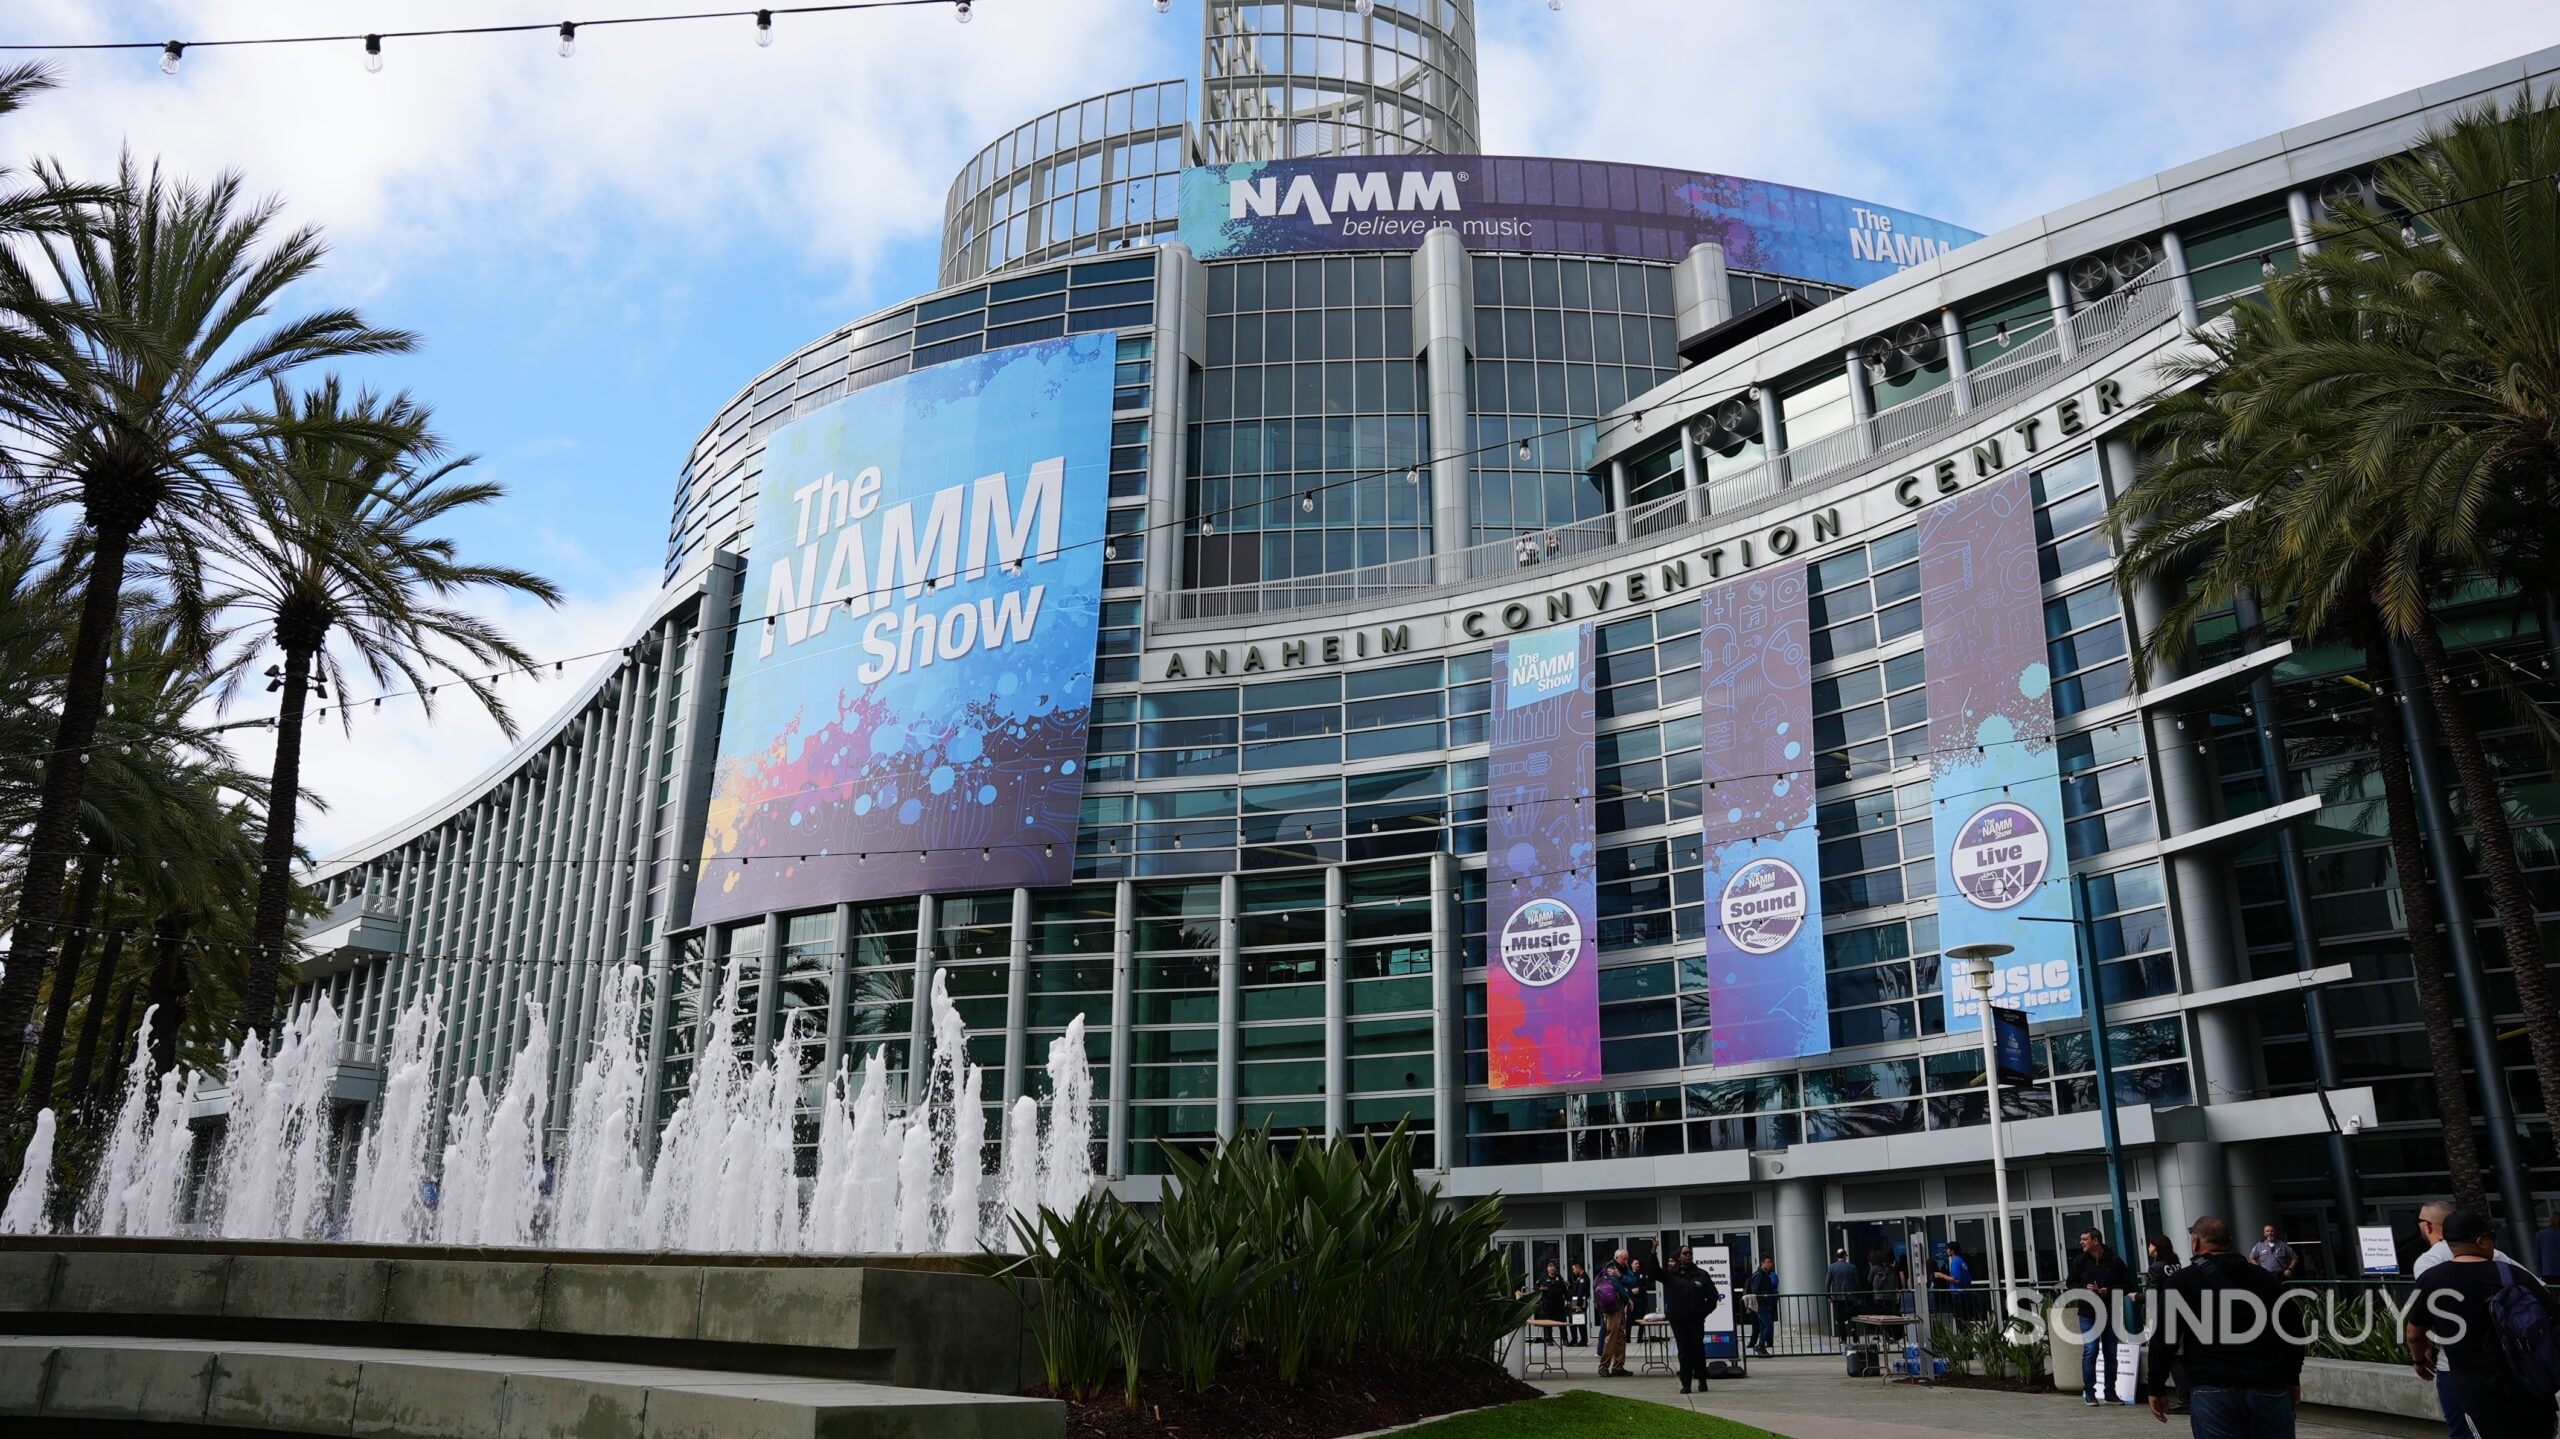 The entrance of the NAMM convention.